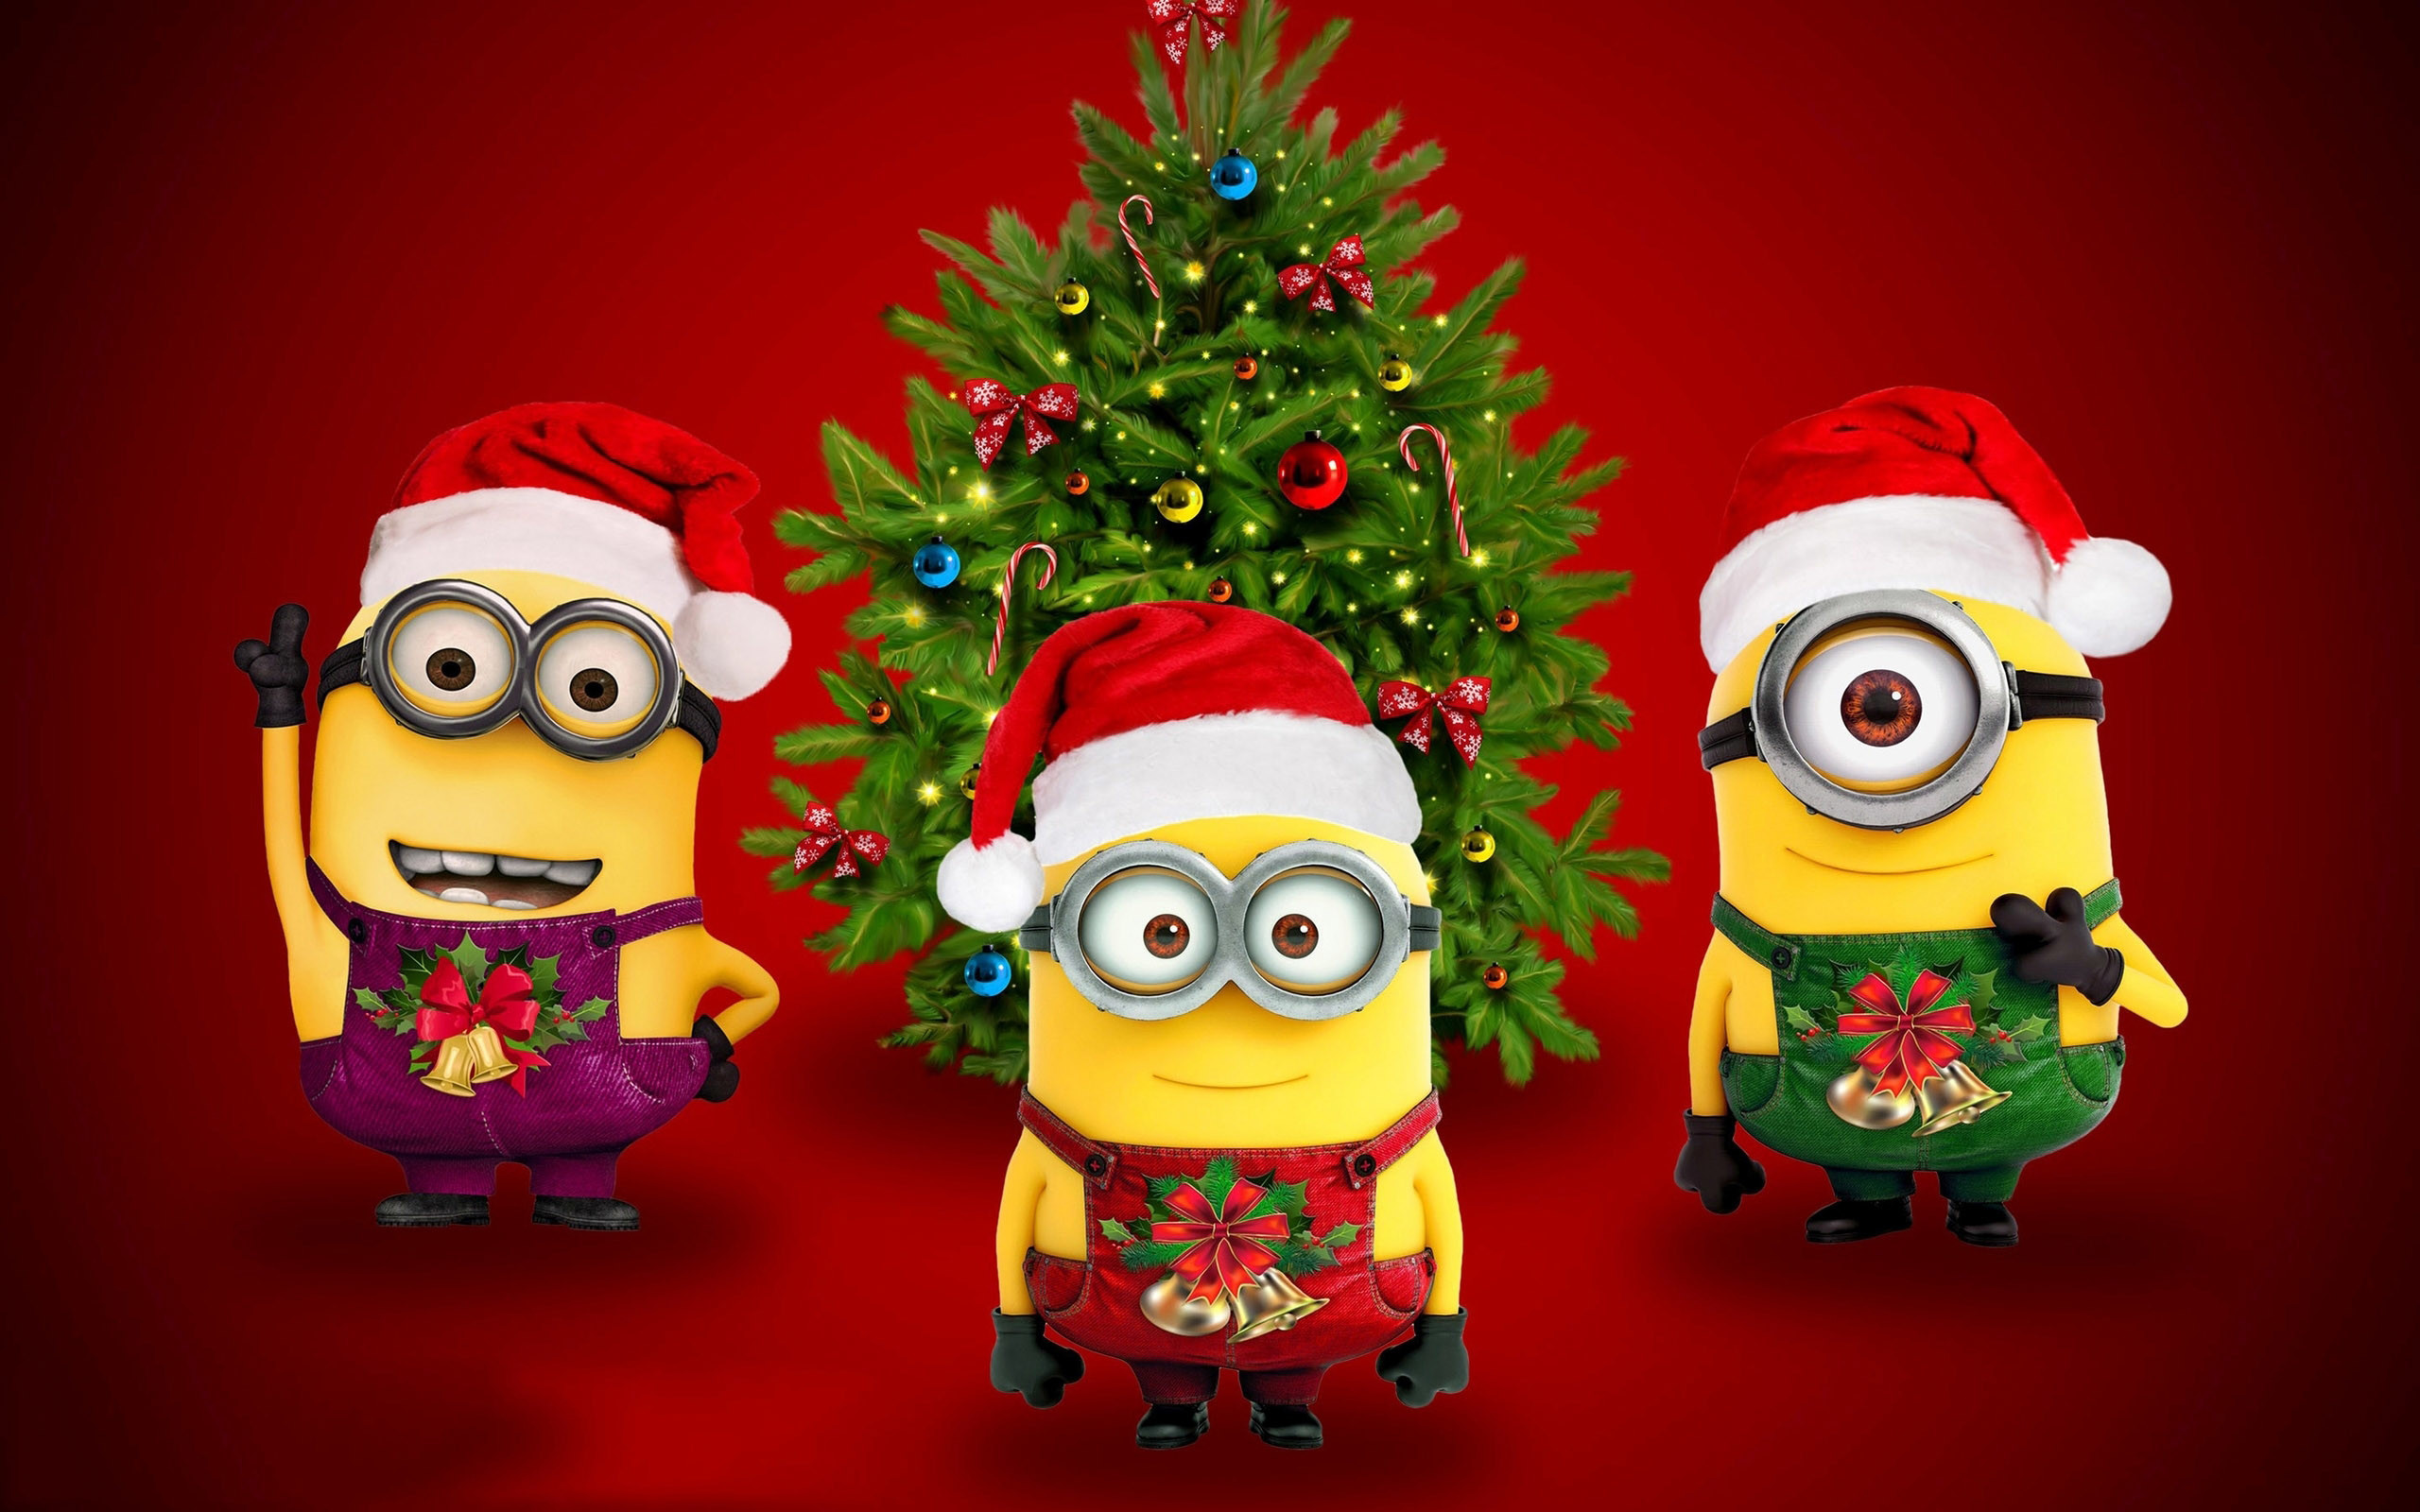 2560x1600 ... Funny Minion Wallpapers Desktop@ For Desktop, Laptop and Mobiles. Here  You Can Download More than 5 Million Photography collections Uploaded By  Users.